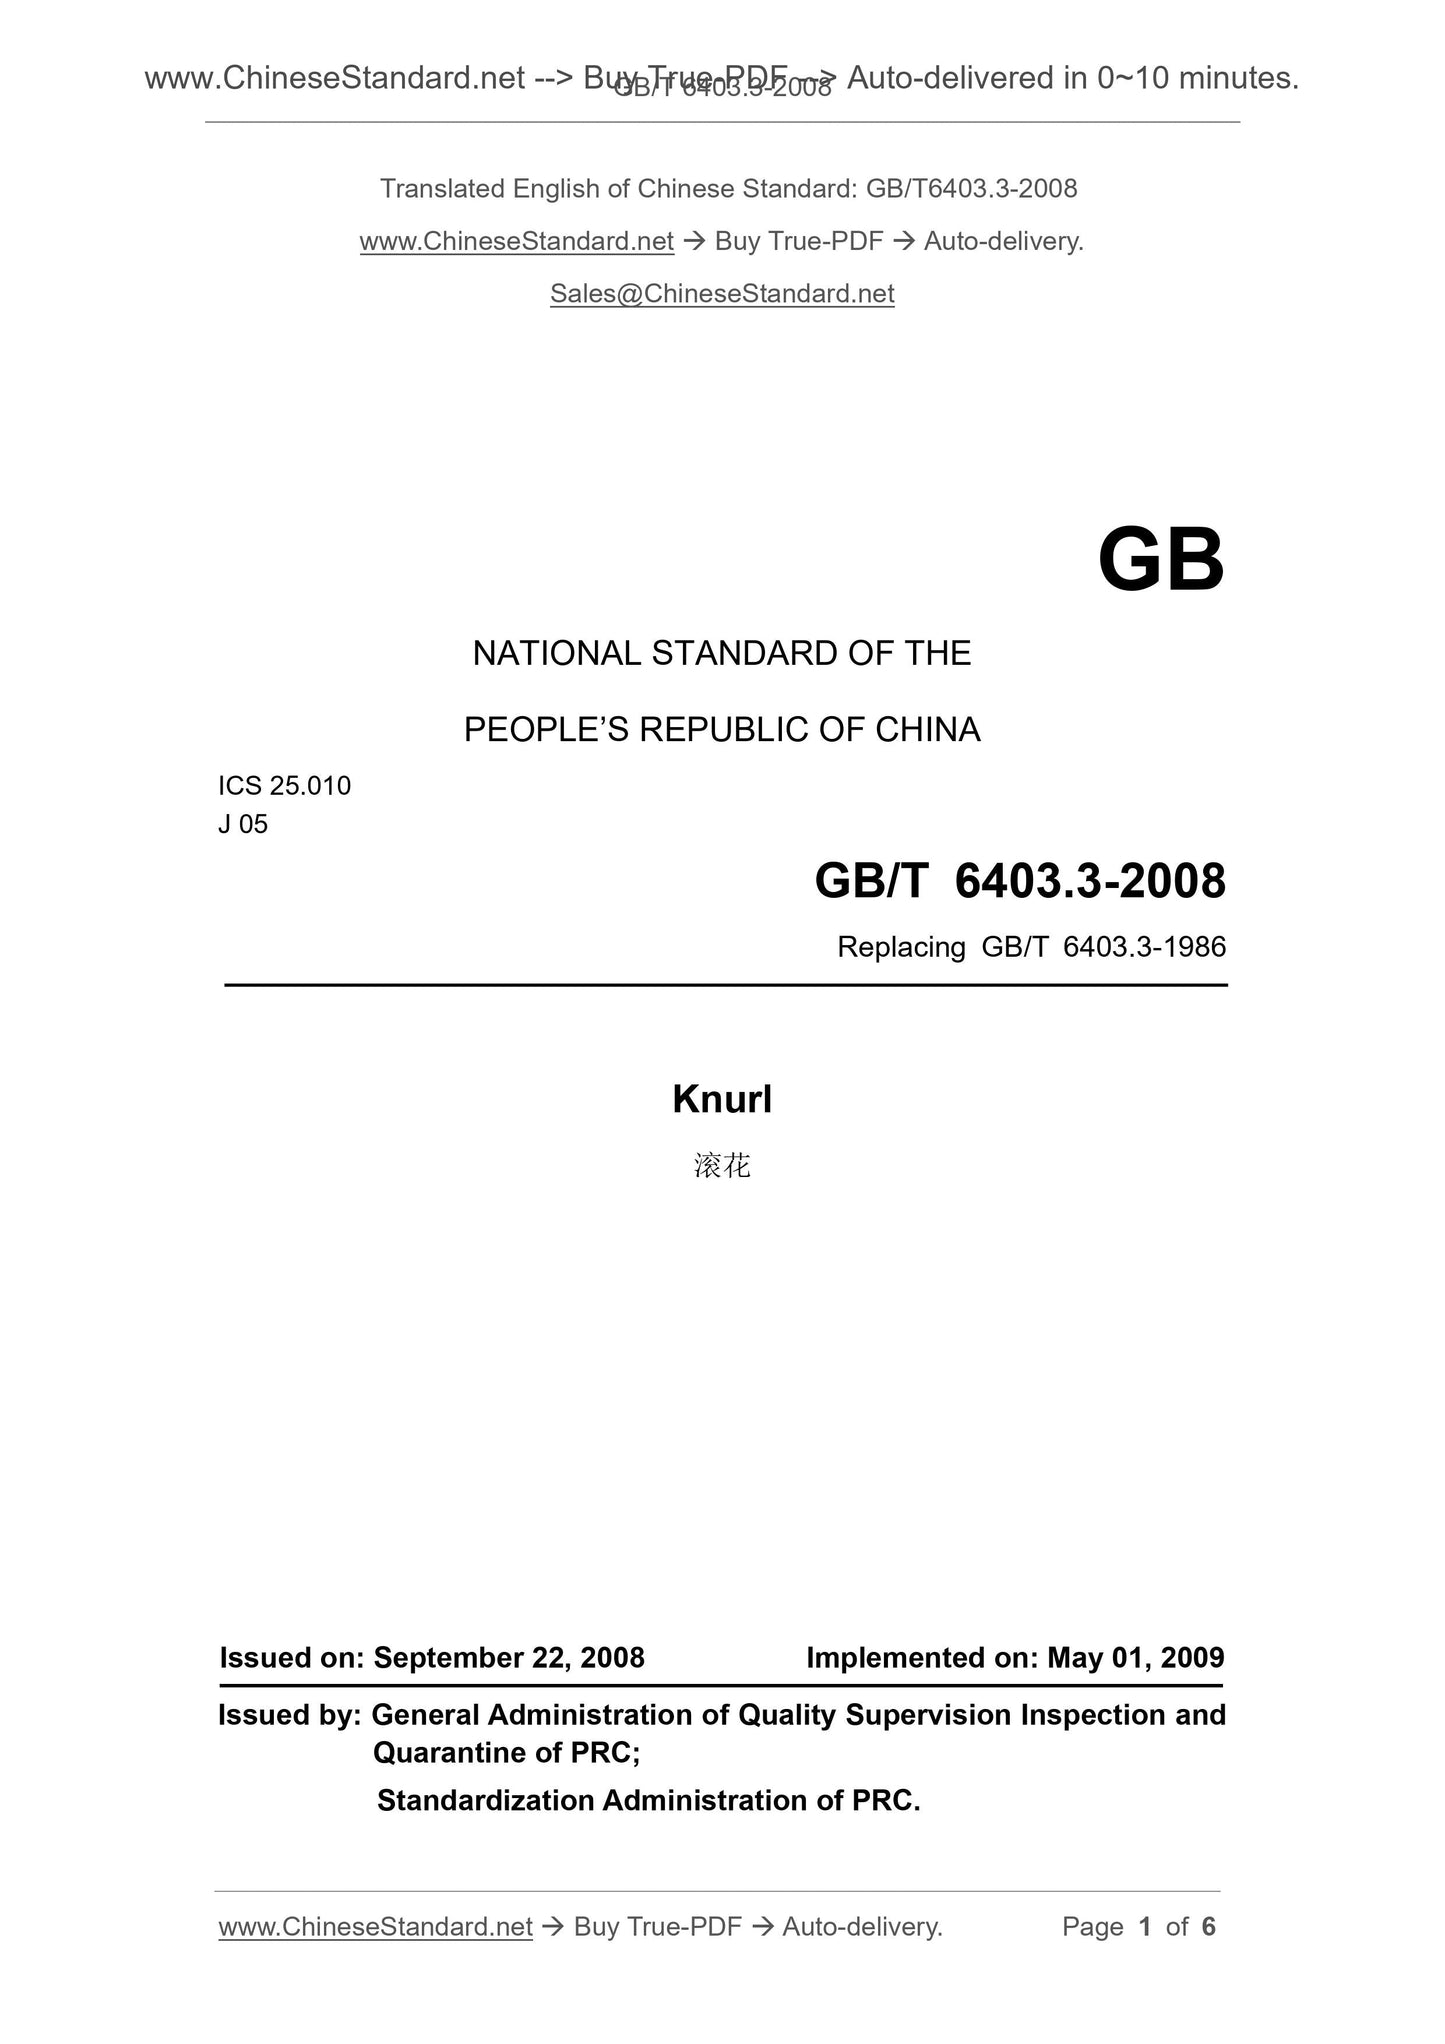 GB/T 6403.3-2008 Page 1